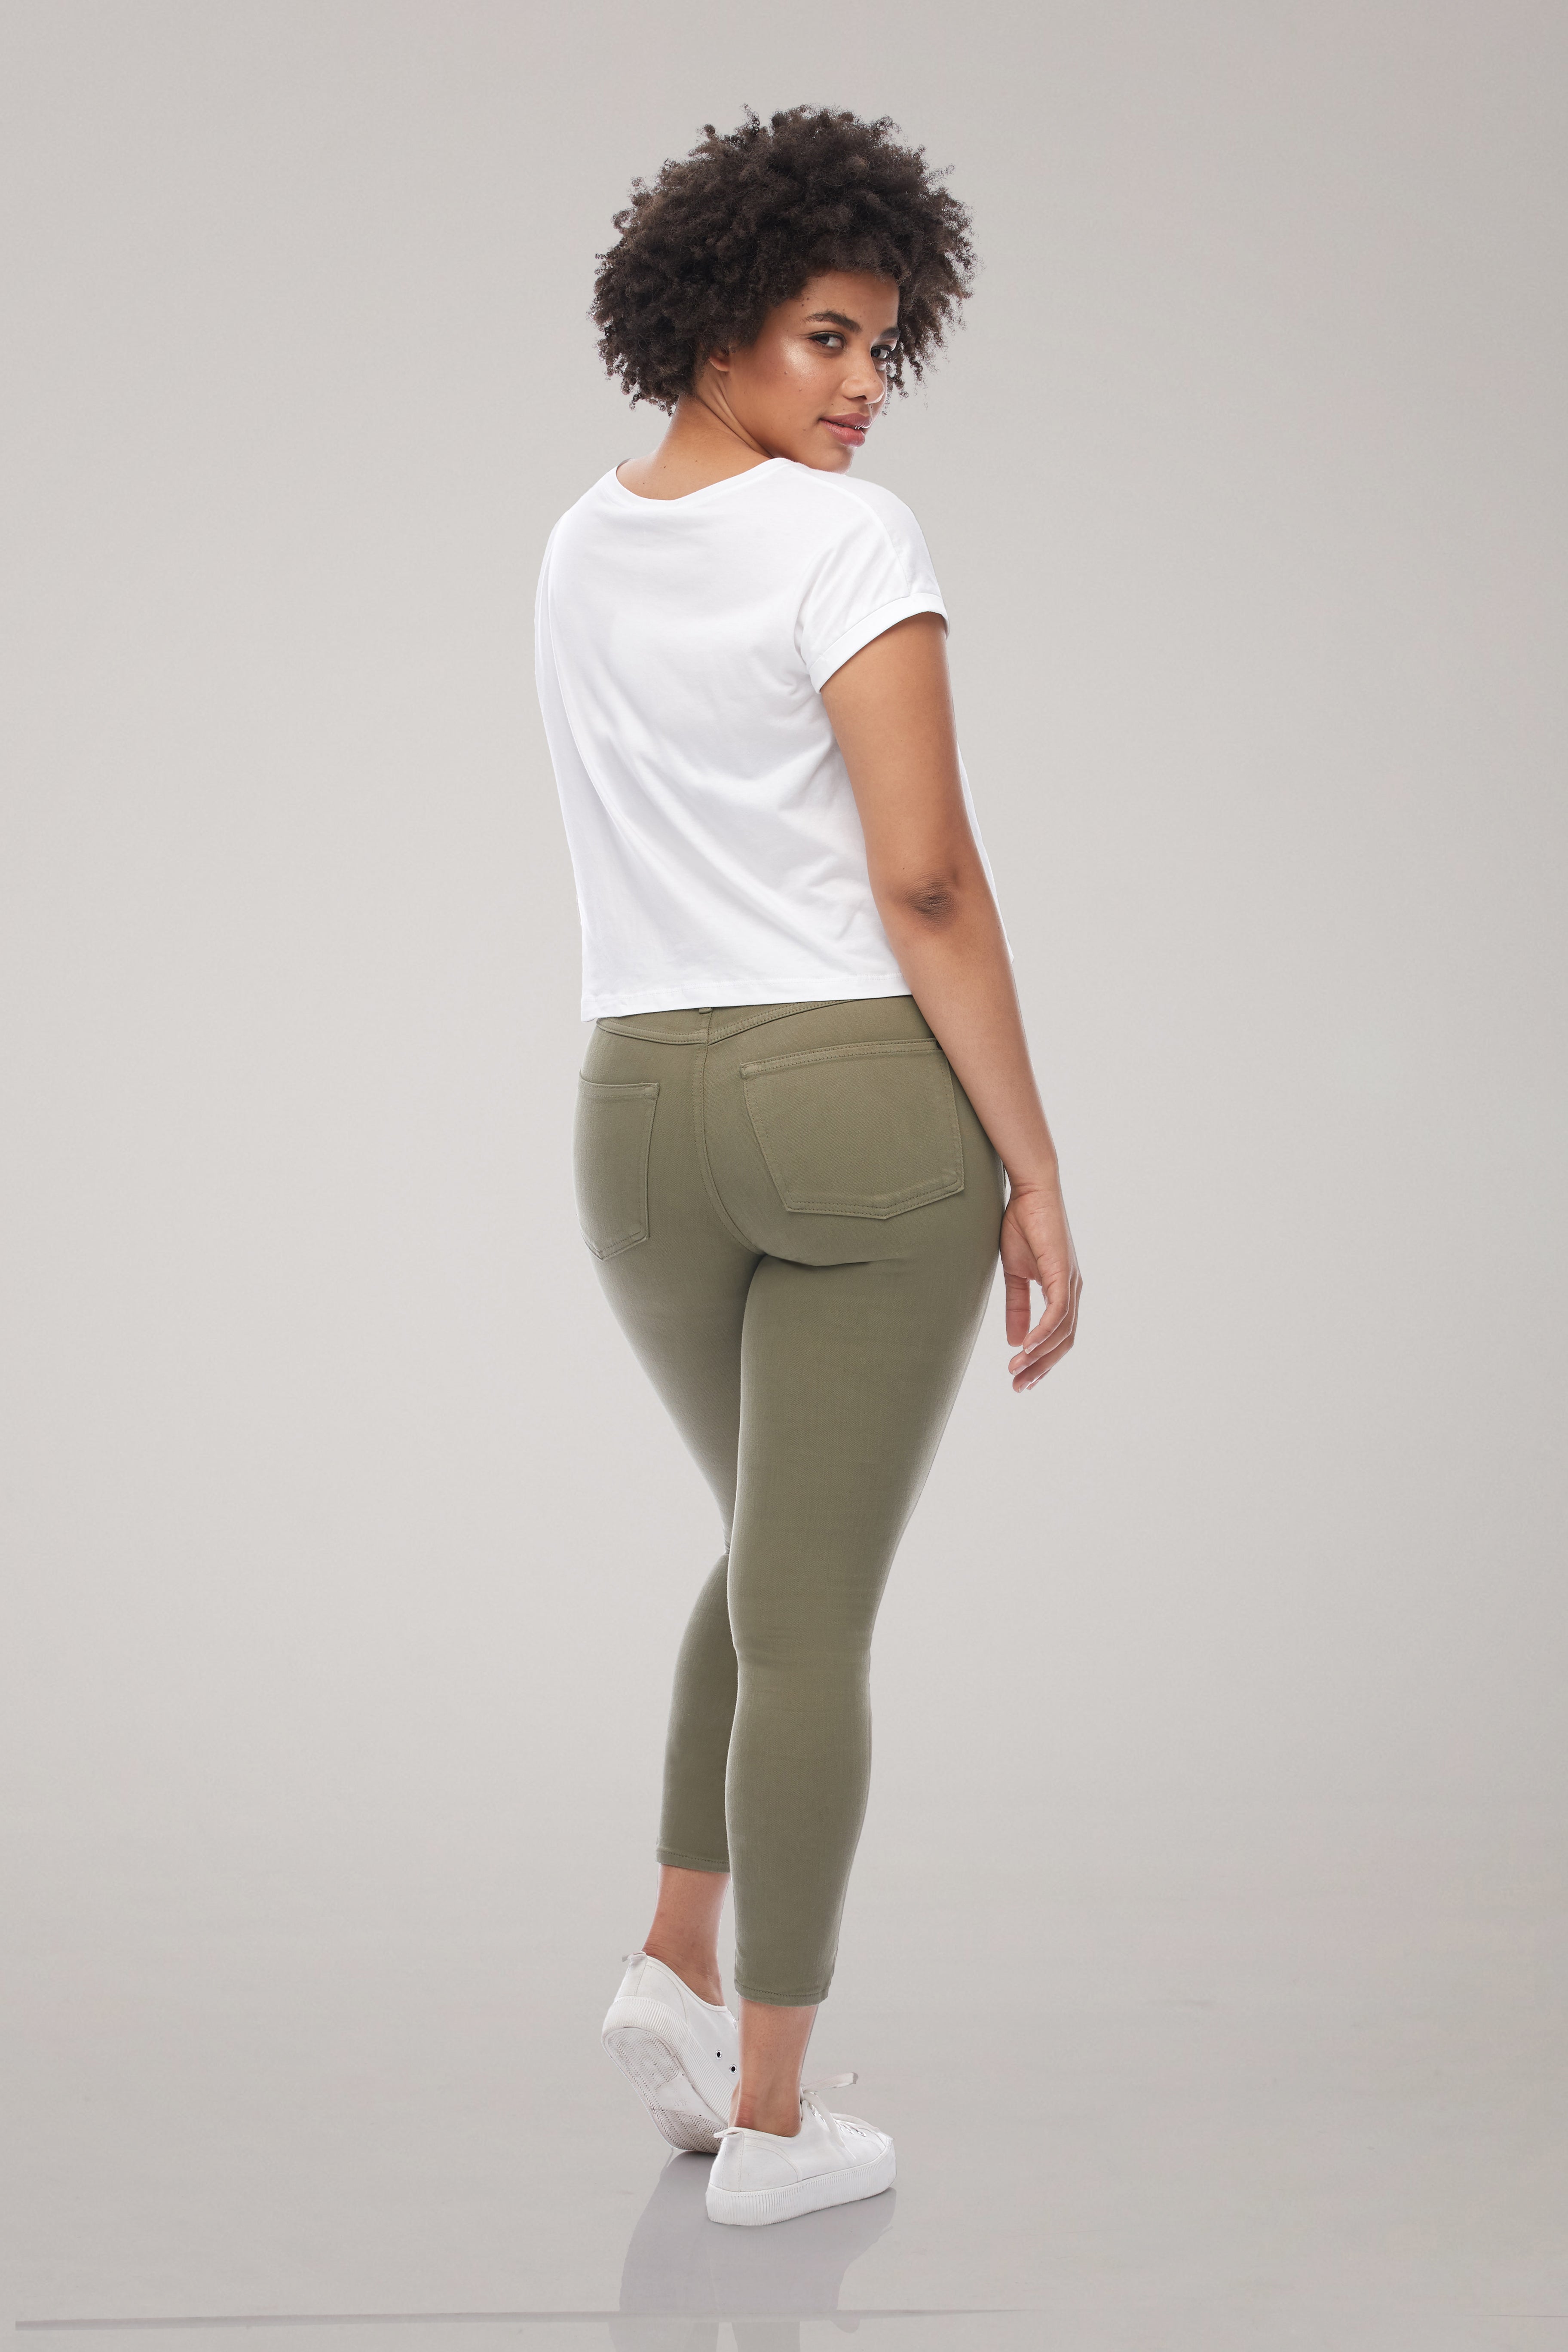 Rachel Classic Rise Skinny Ankle Yoga Jean, back view, Desert Road, 27 inch inseam, sizes 24-34, made in Canada